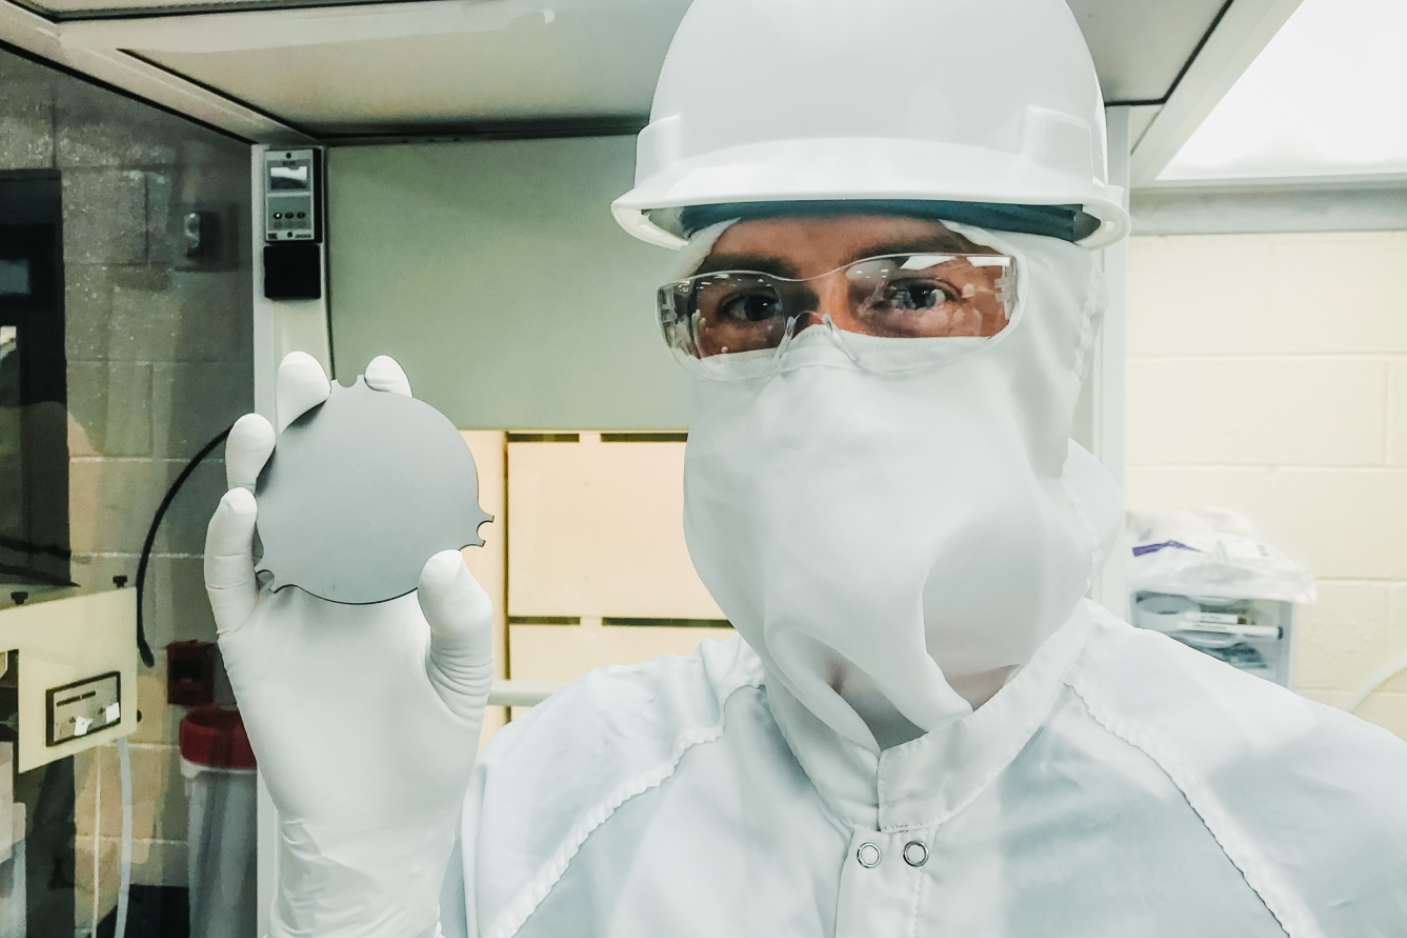 Samuel Meijer, staff scientist at Los Alamos National Laboratory, holds a tantalum plate in a cleanroom on the 4850 Level of Sanford Underground Research Facility, where a new experiment is searching for  the decay of nature’s rarest isotope.